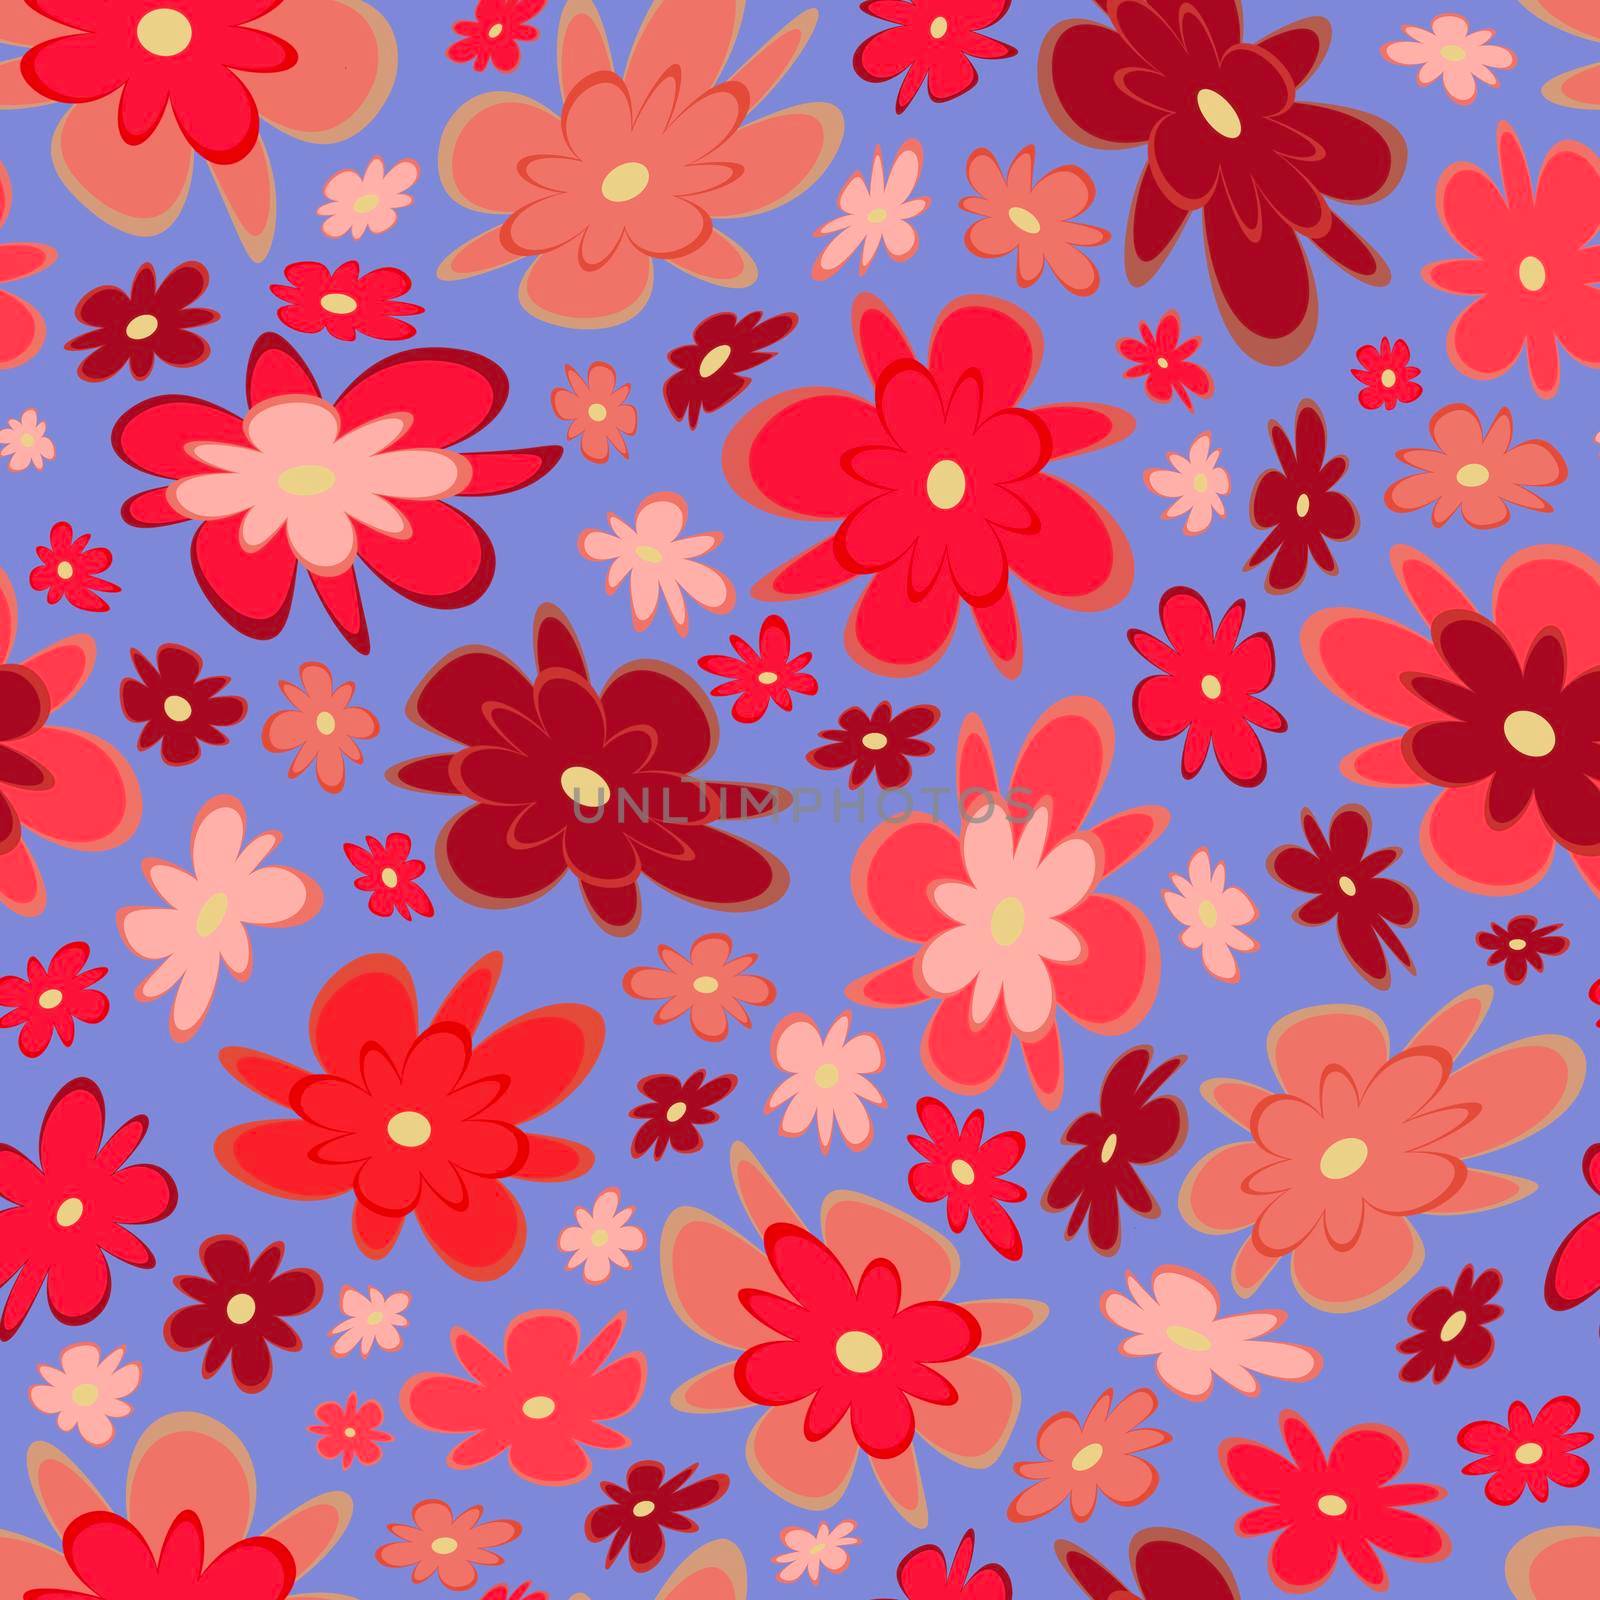 Trendy fabric pattern with miniature flowers.Summer print.Fashion design.Motifs scattered random.Elegant template for fashion prints.Pink on azure.Good for fashion,textile,fabric,gift wrapping paper.